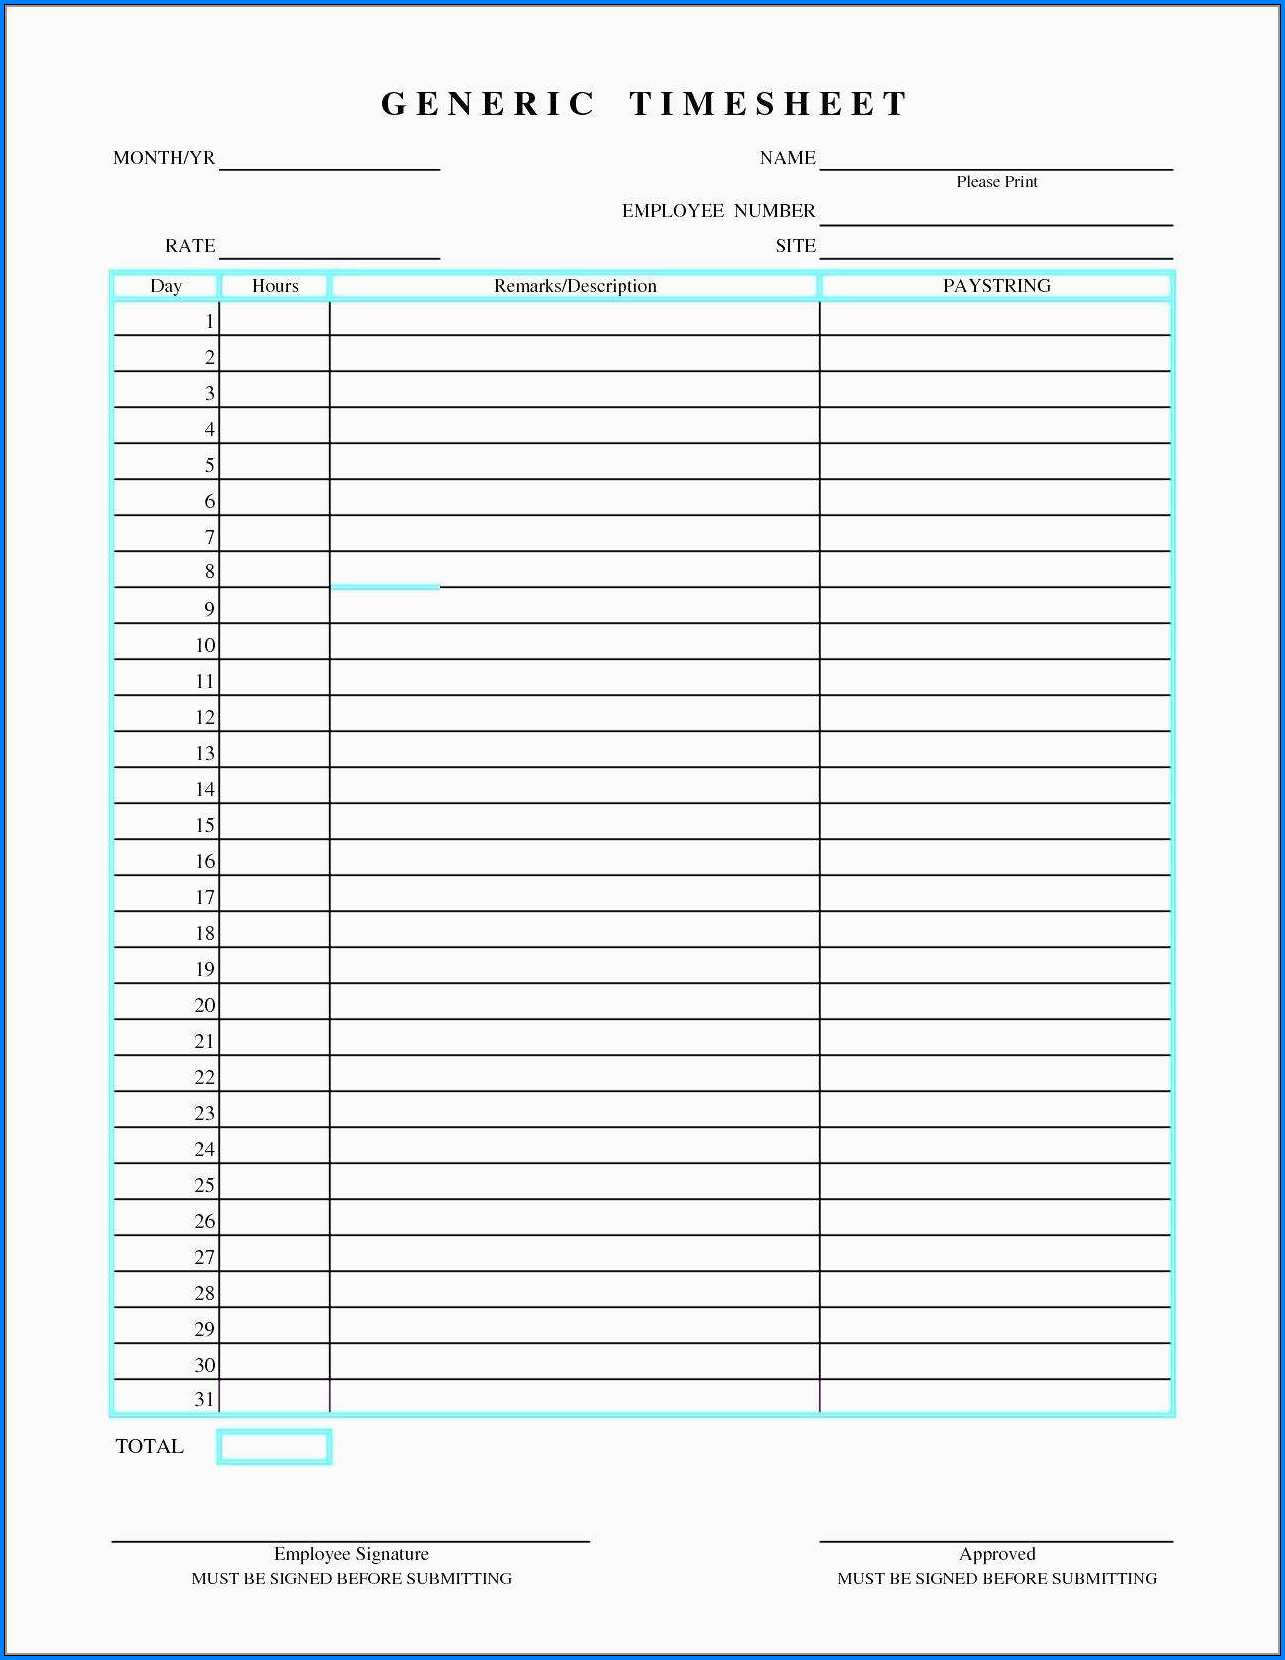 Legal Timesheet Template from www.templateral.com